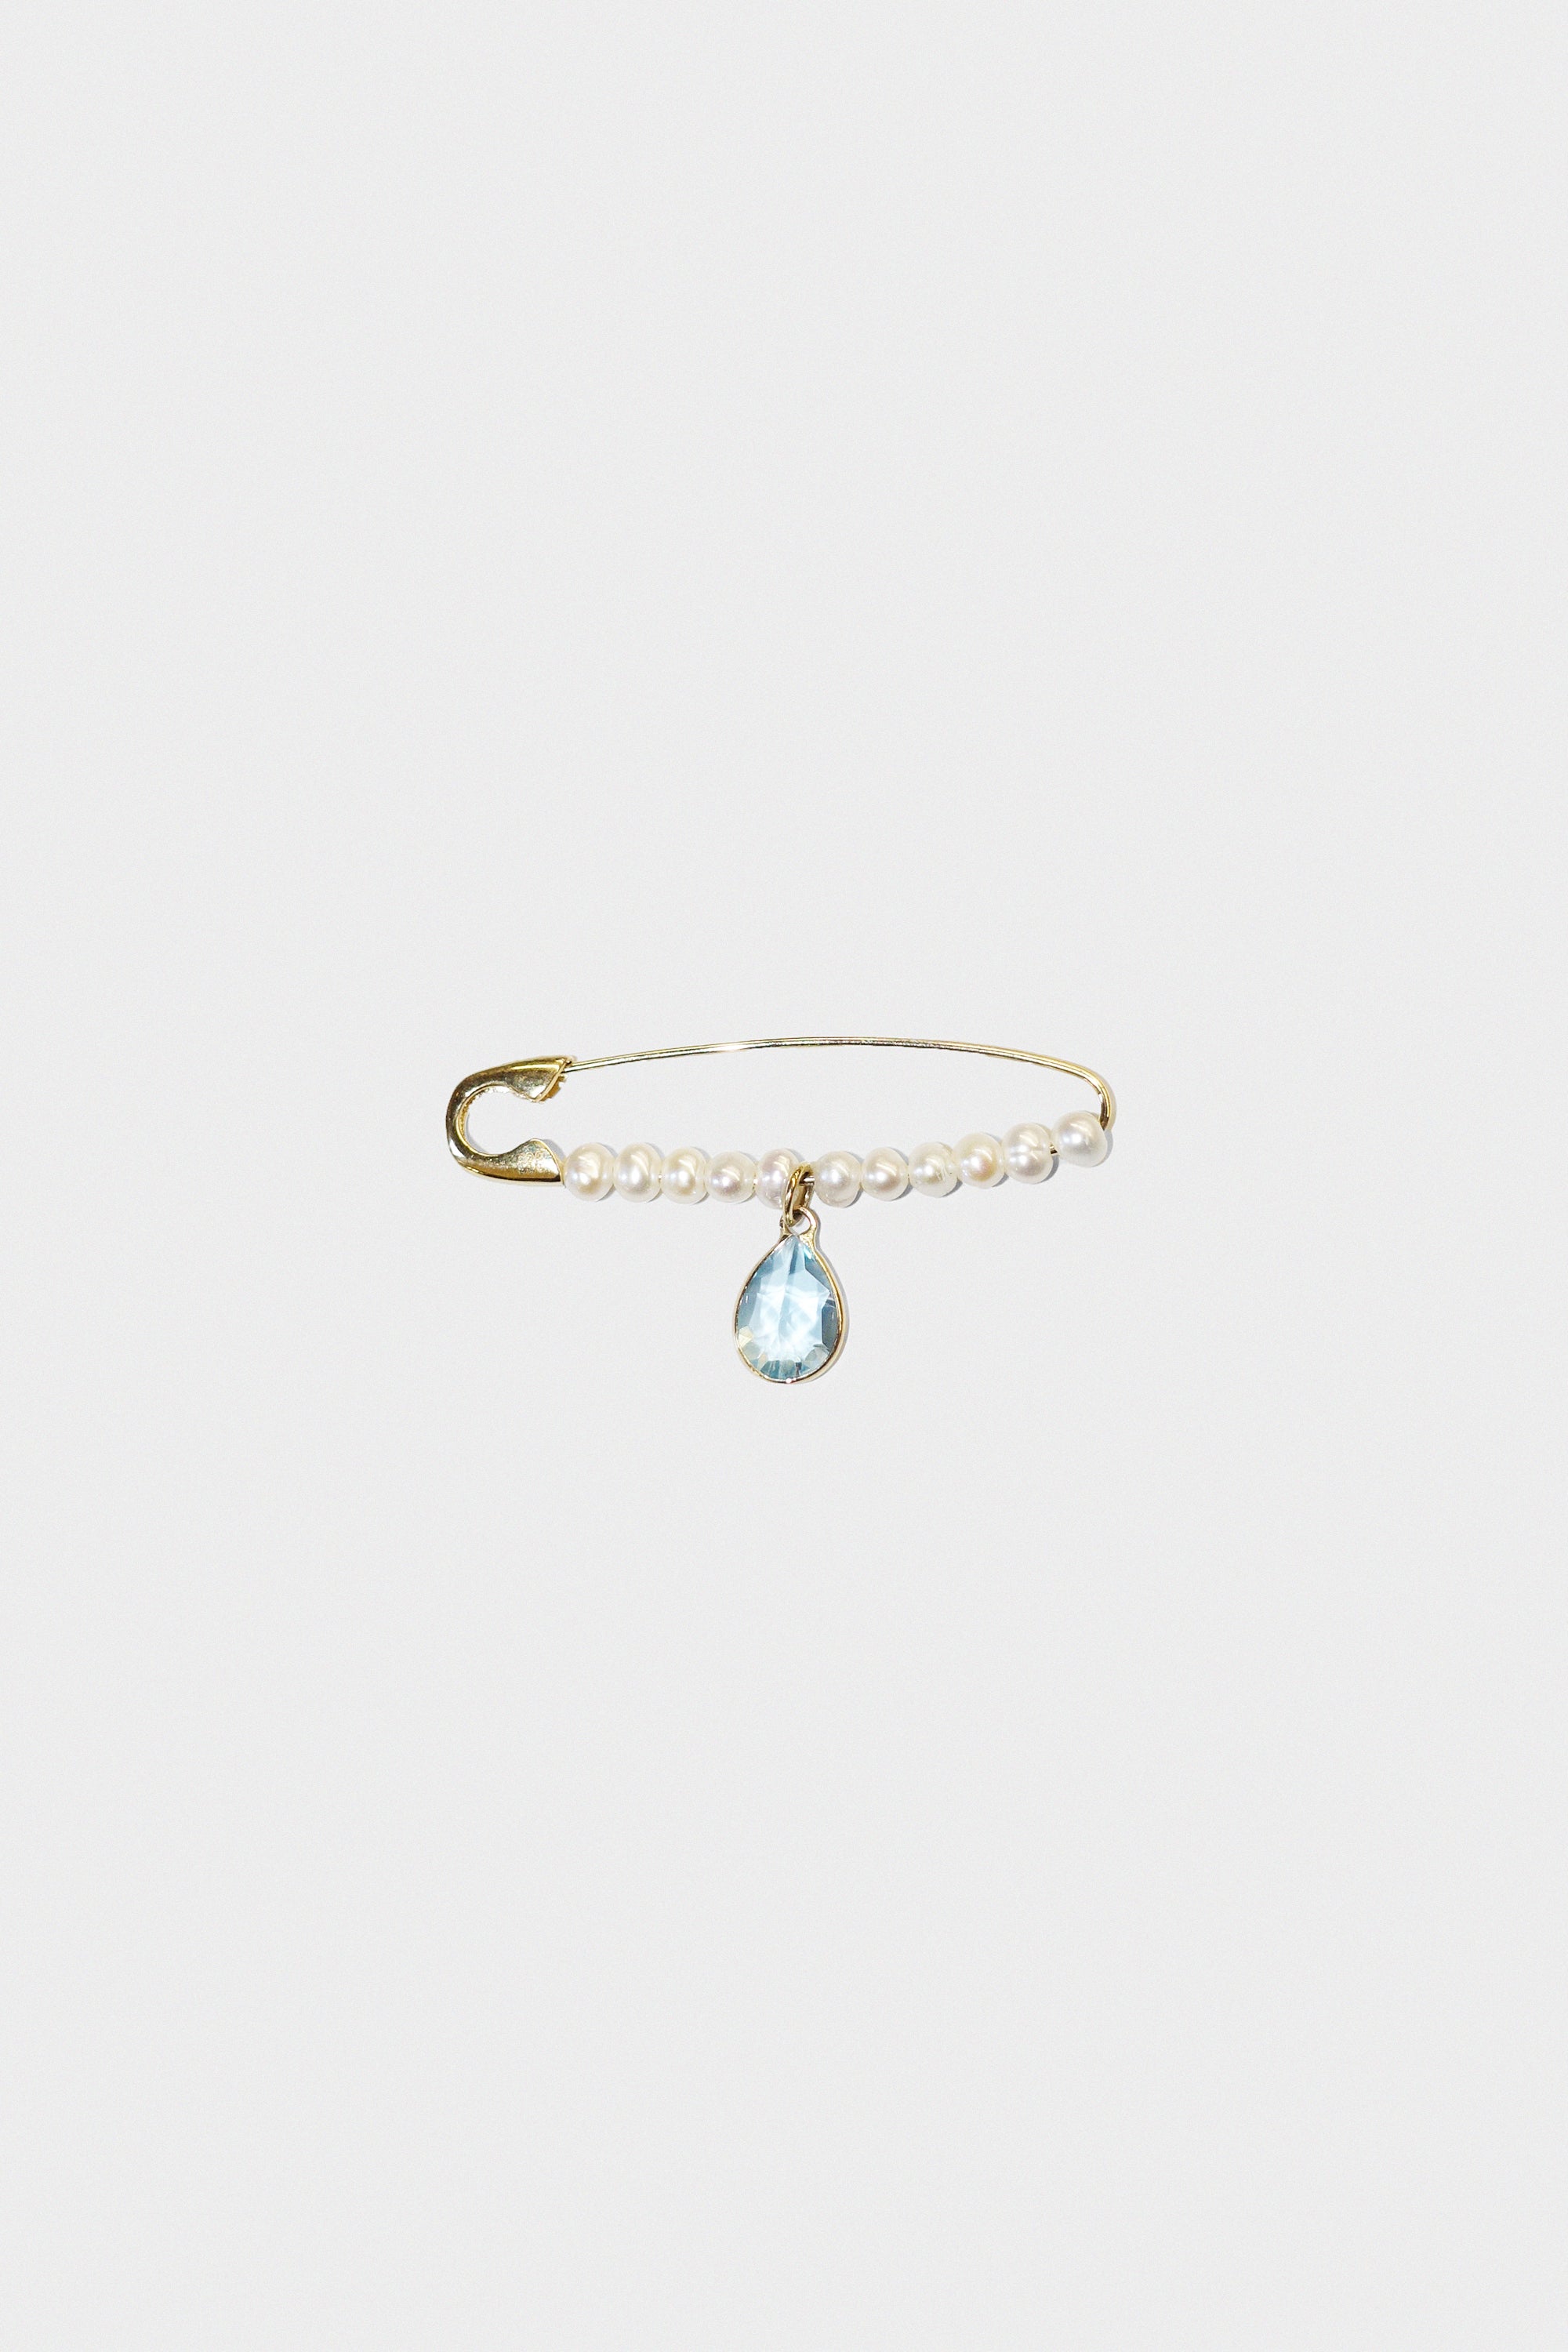 XL Pearl Gem Safety Pin in 14k Gold & Topaz